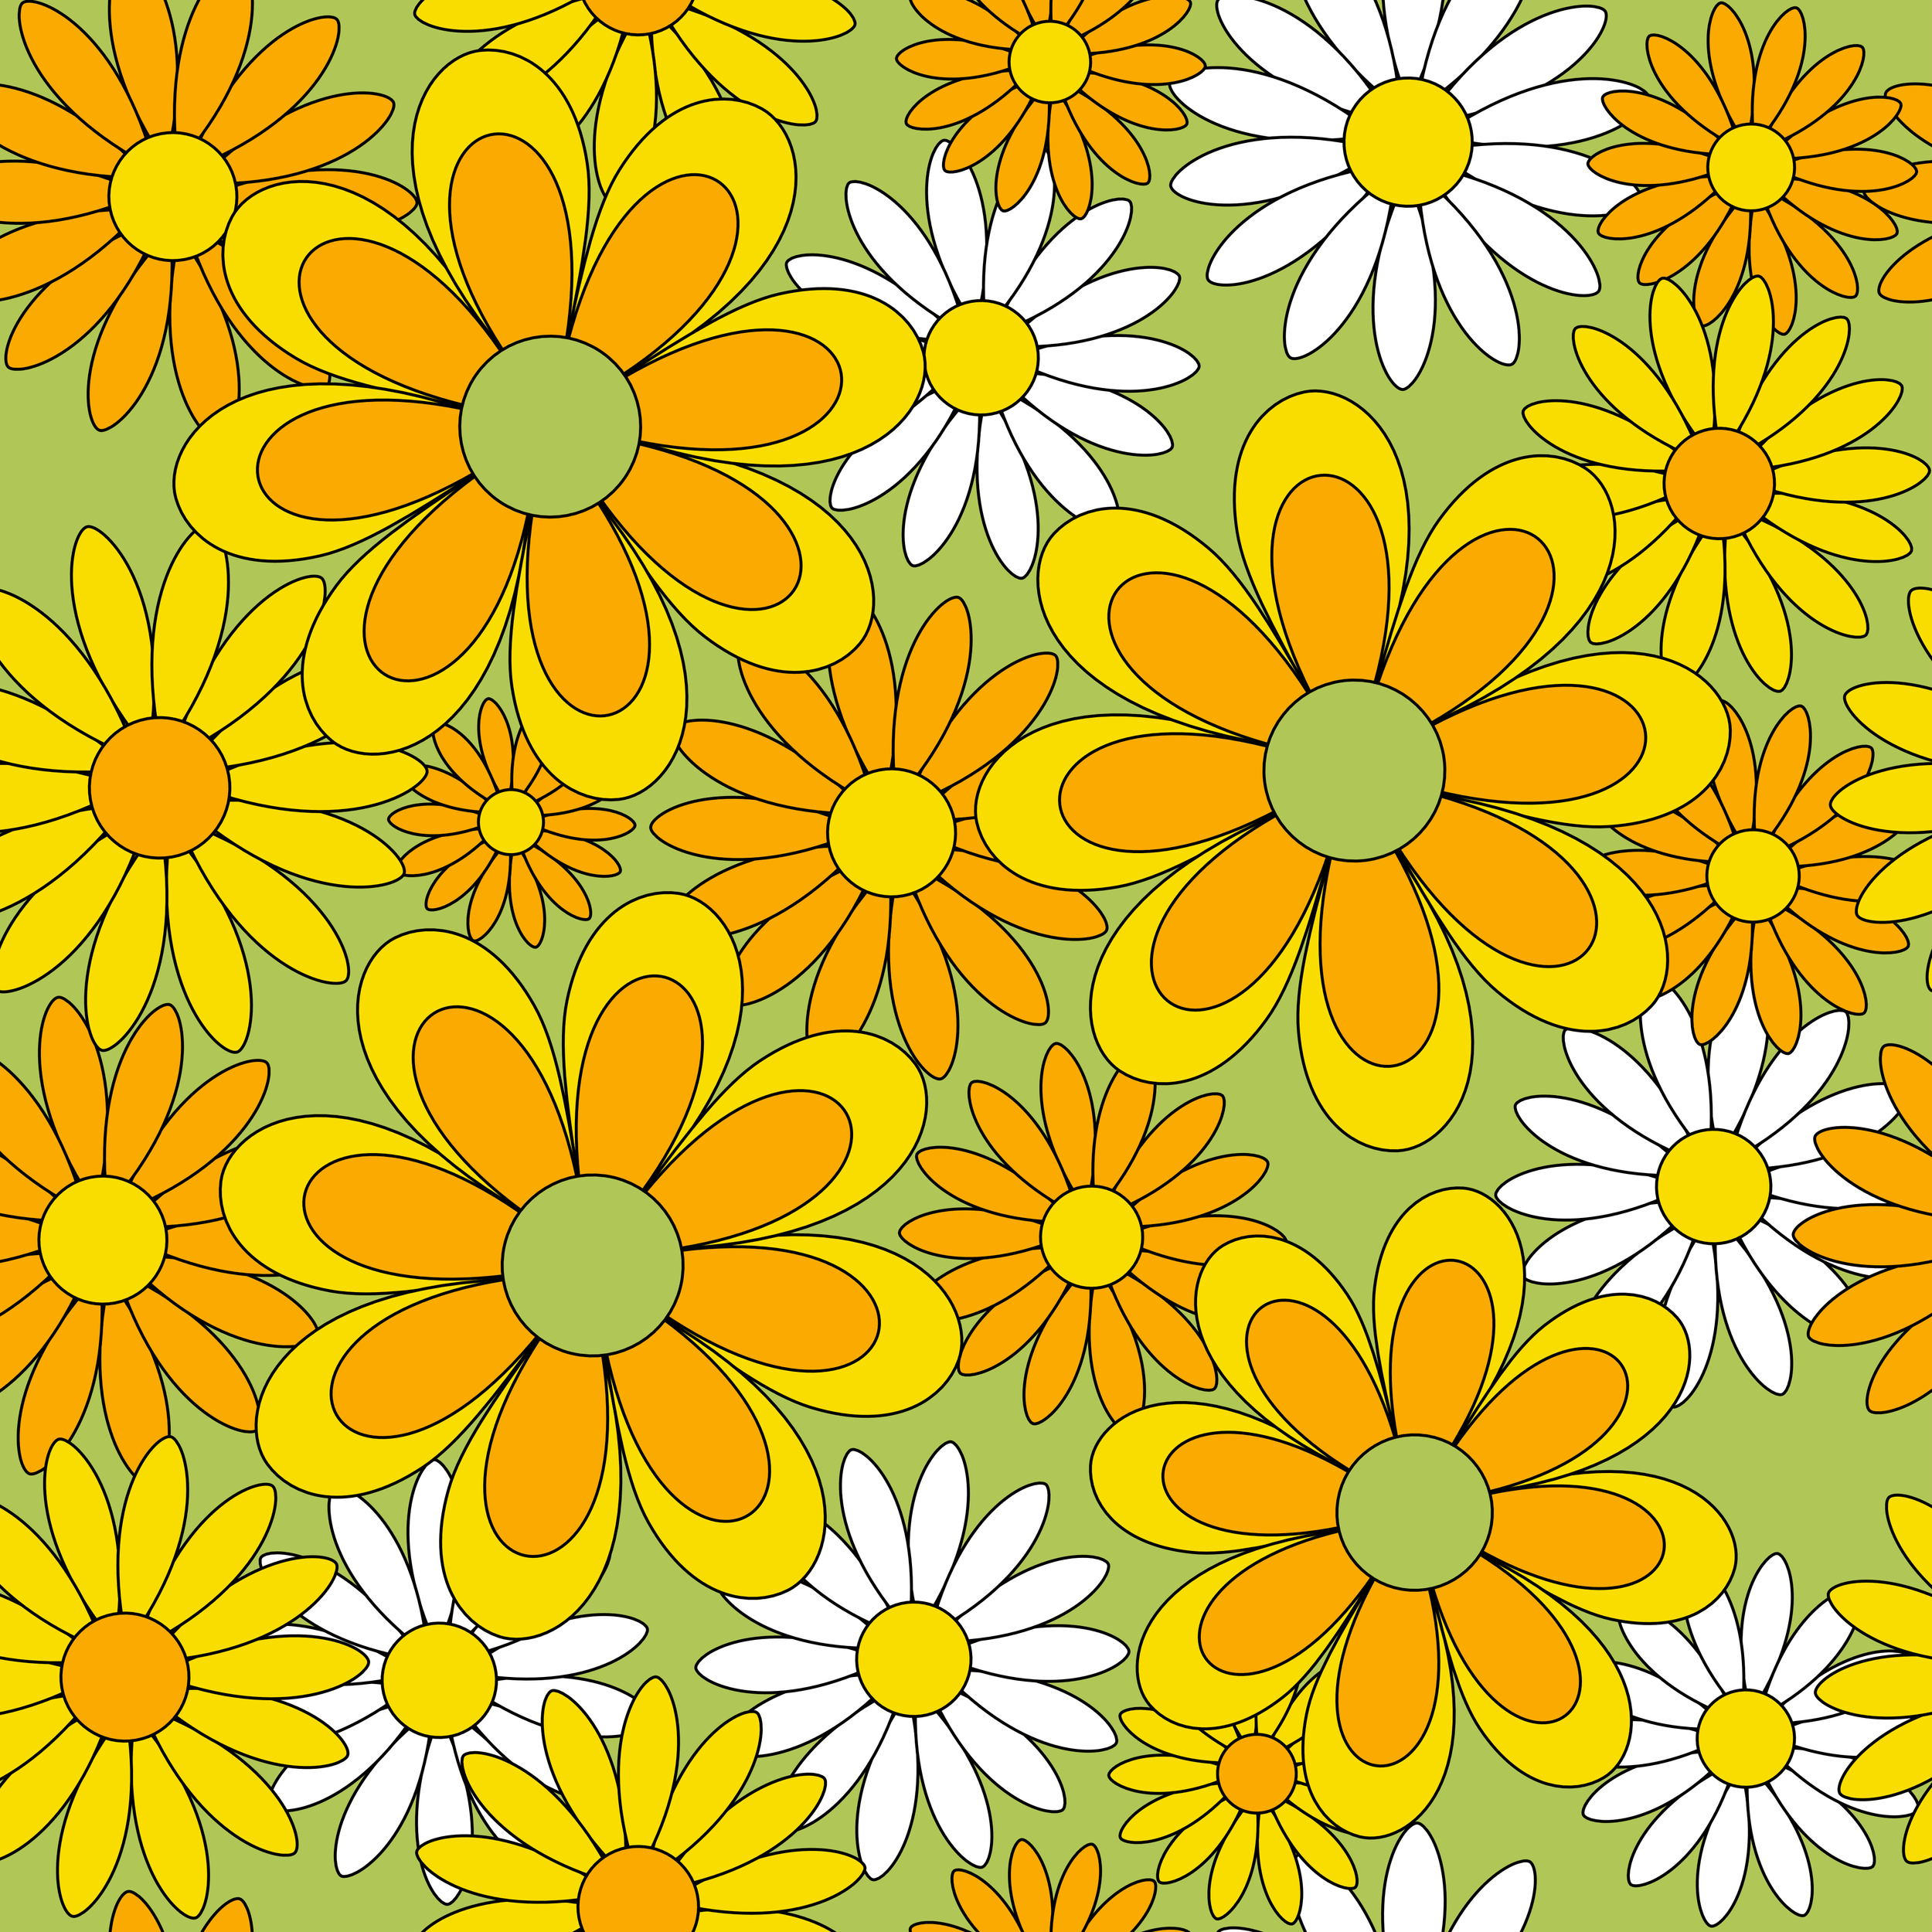 70s Flower Power yellow colorway final draft.png